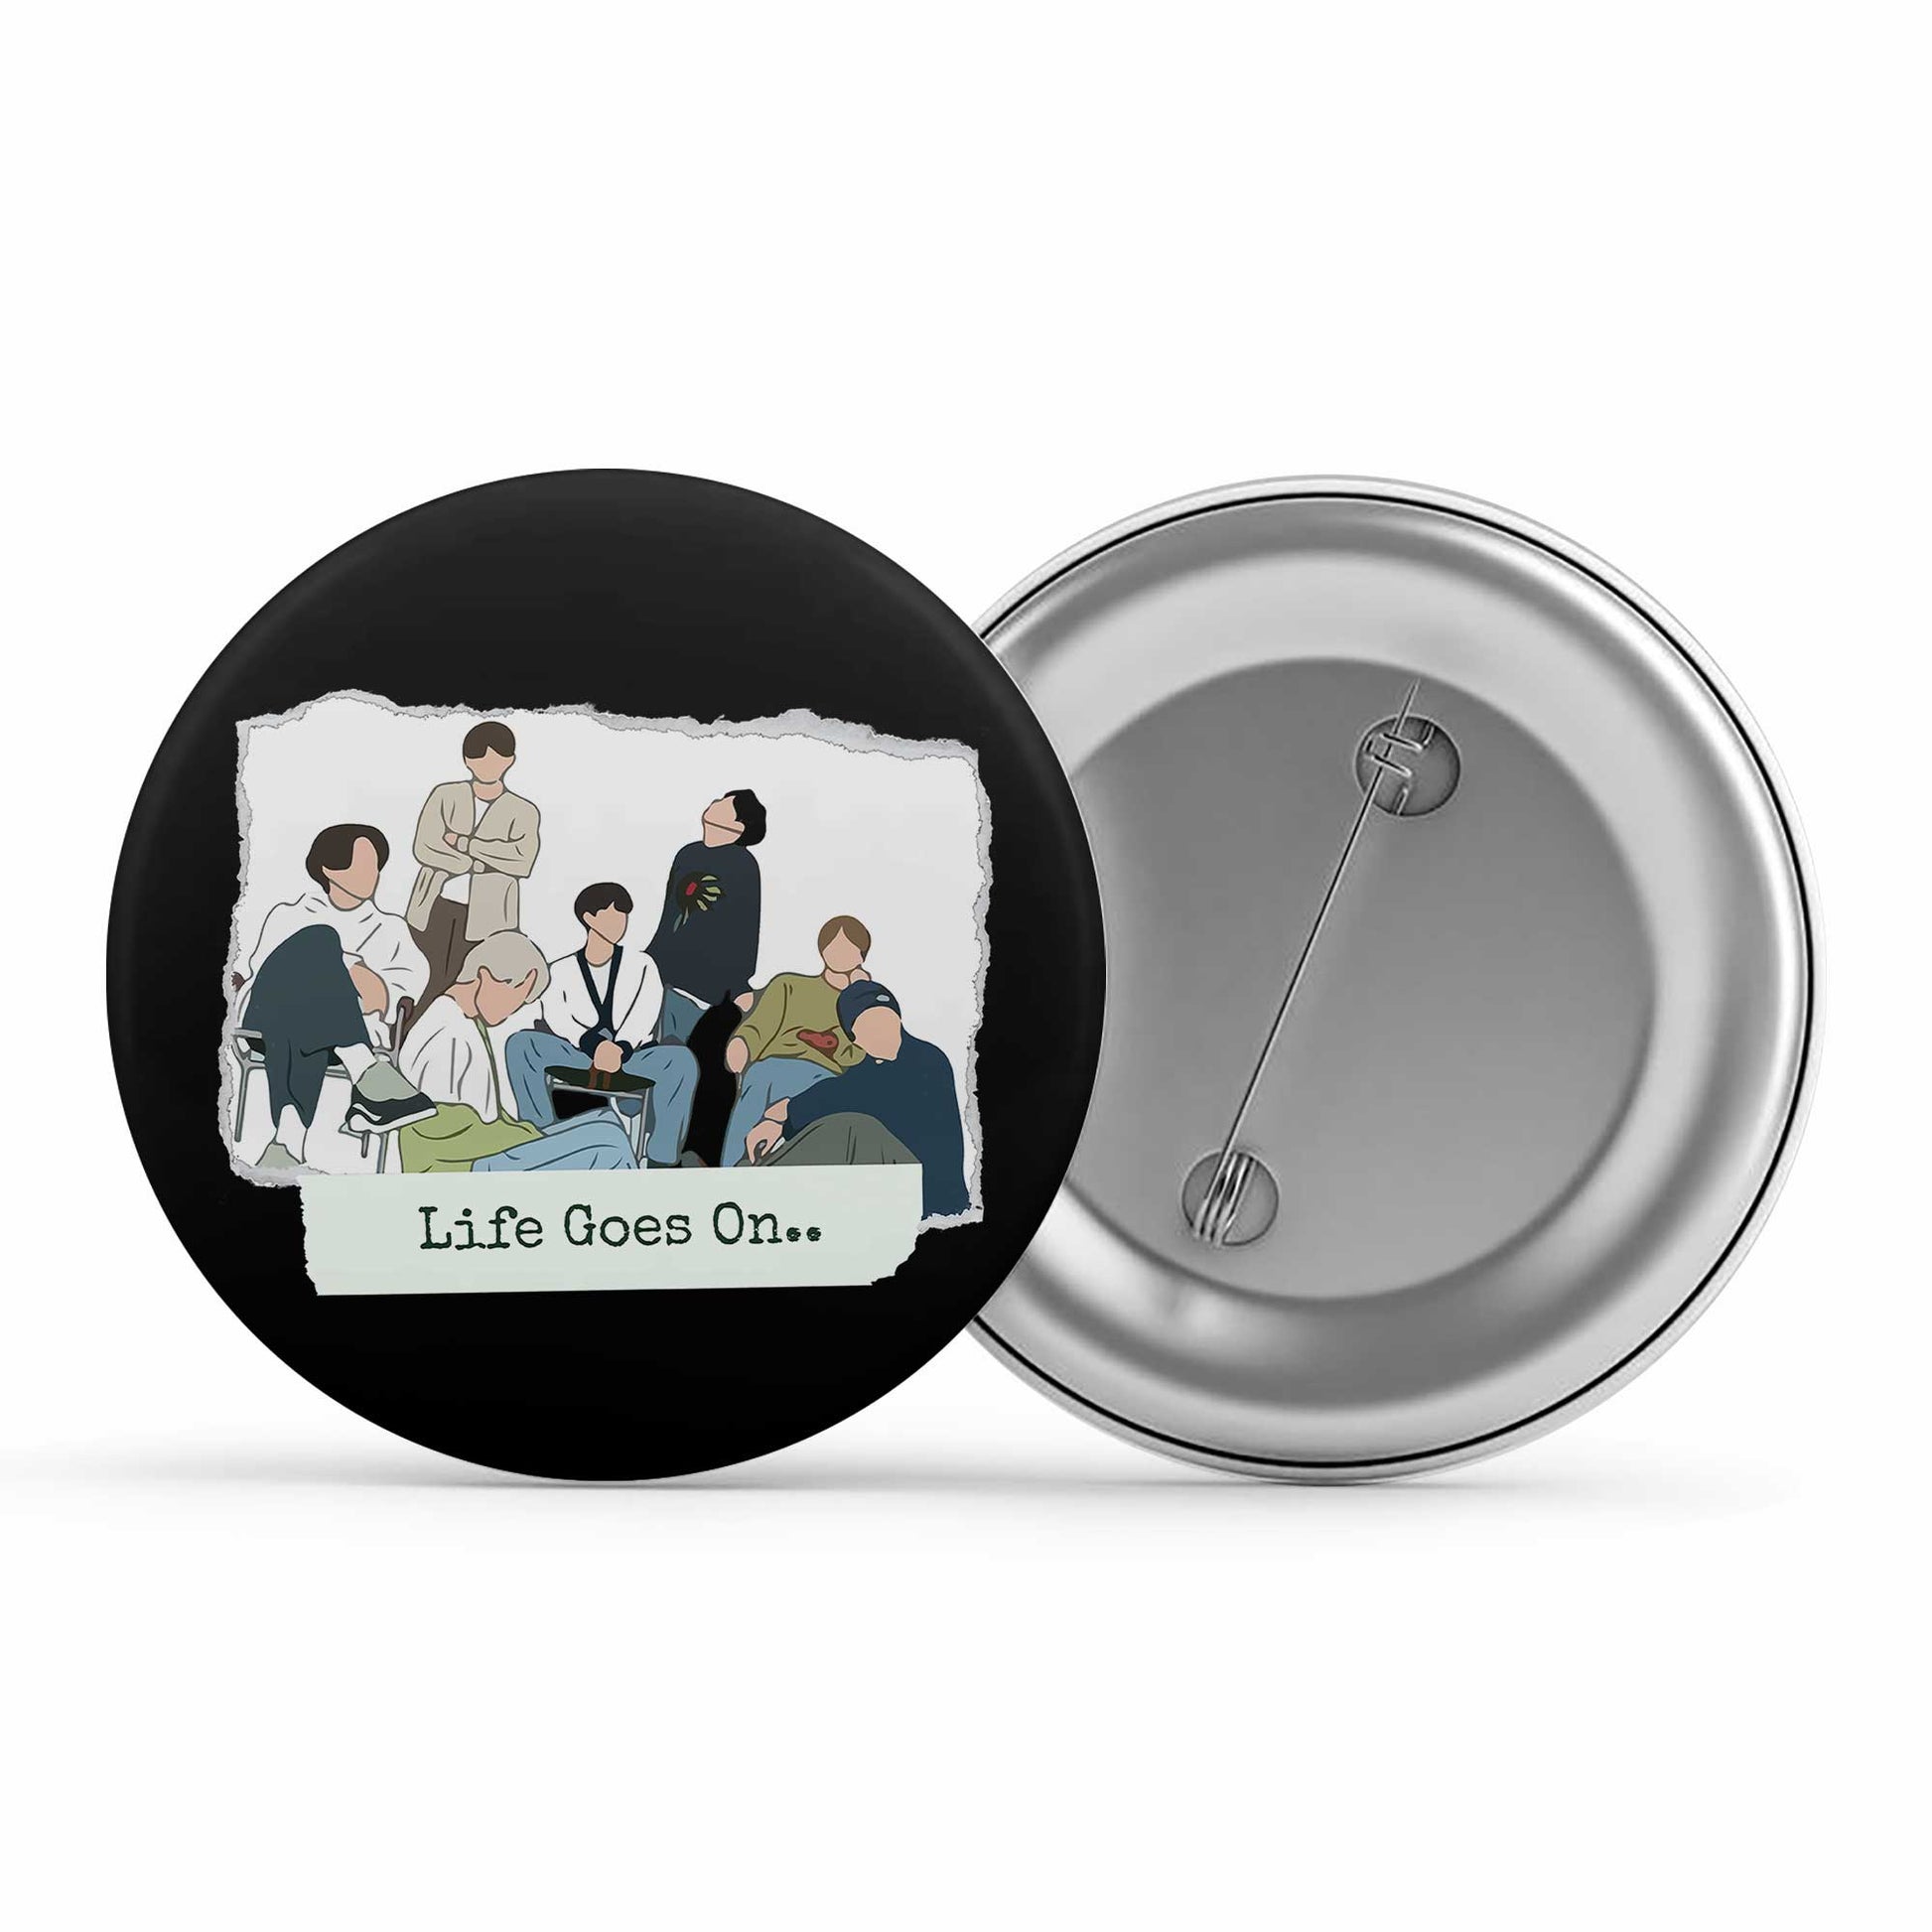 bts life goes on badge pin button music band buy online united states of america usa the banyan tee tbt men women girls boys unisex  